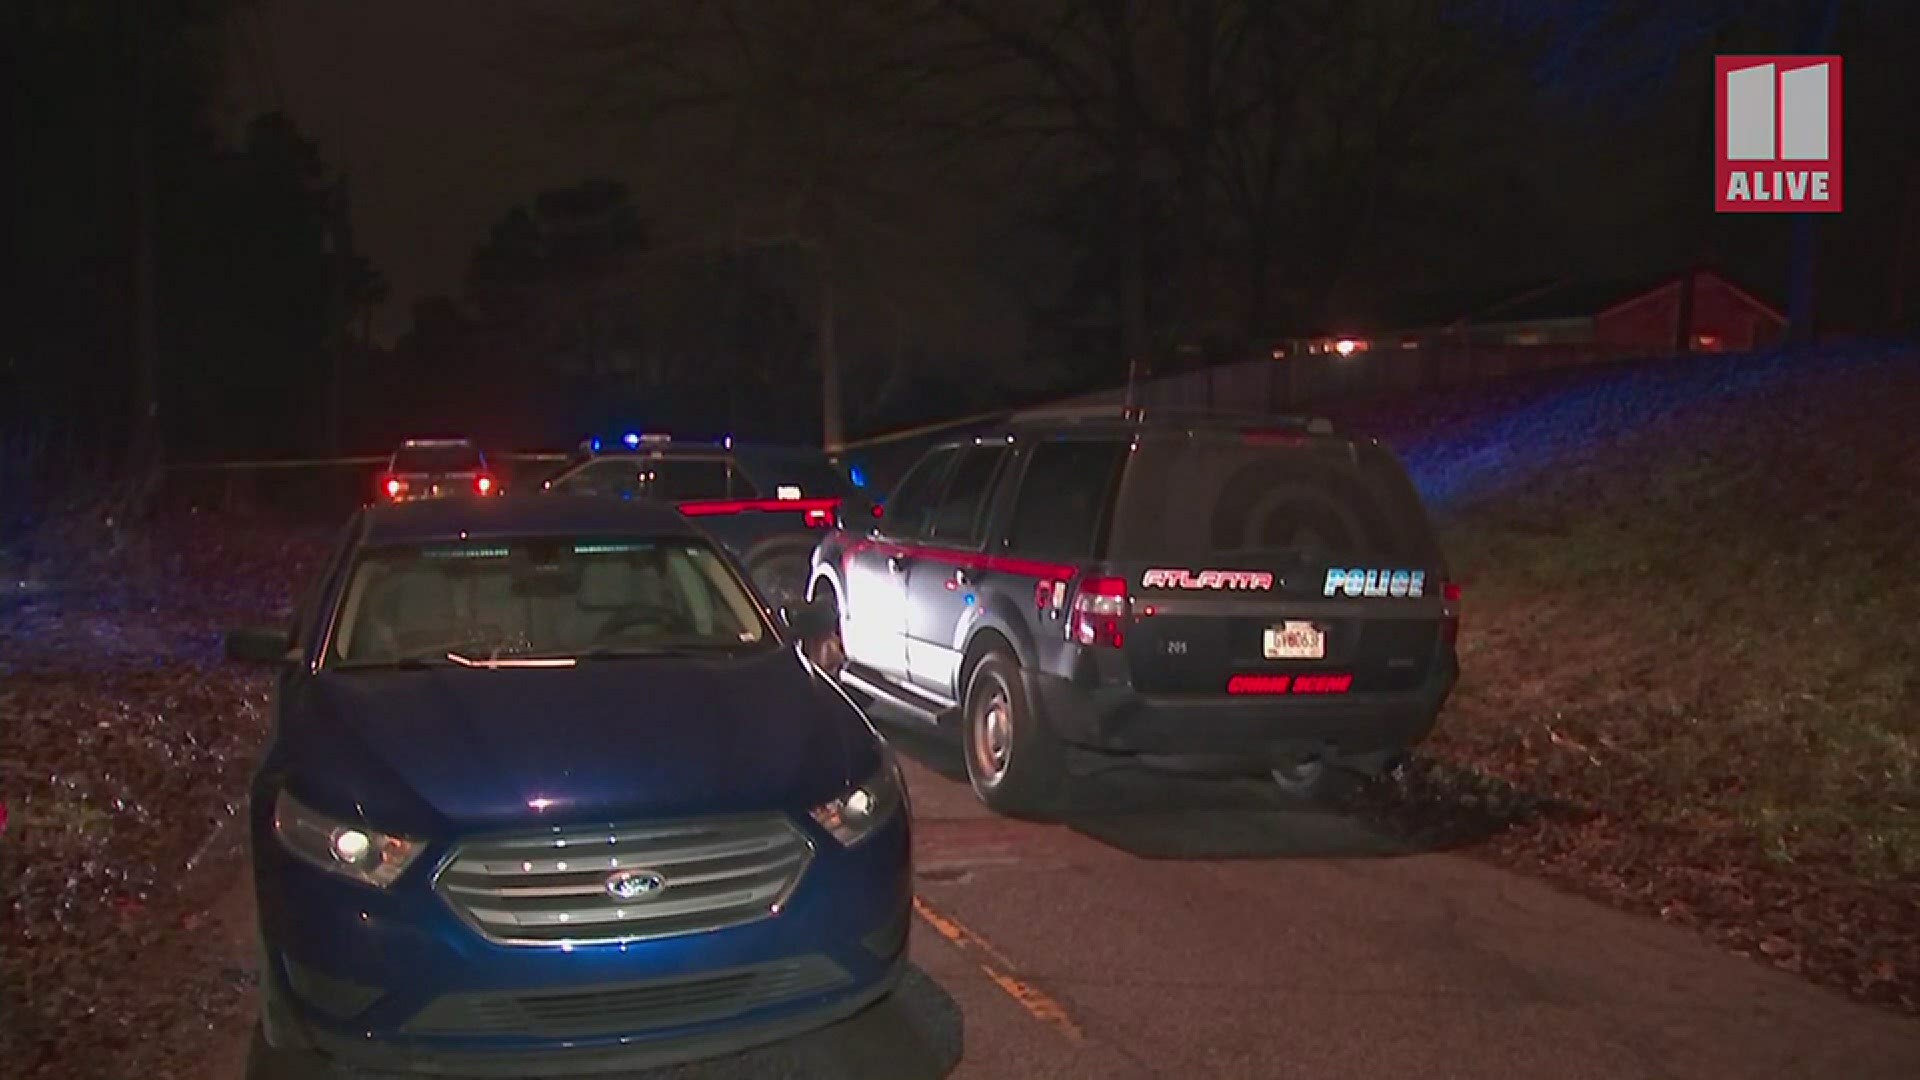 Atlanta Police are investigating a shooting into a crowded home Thursday night that left a woman critically injured.